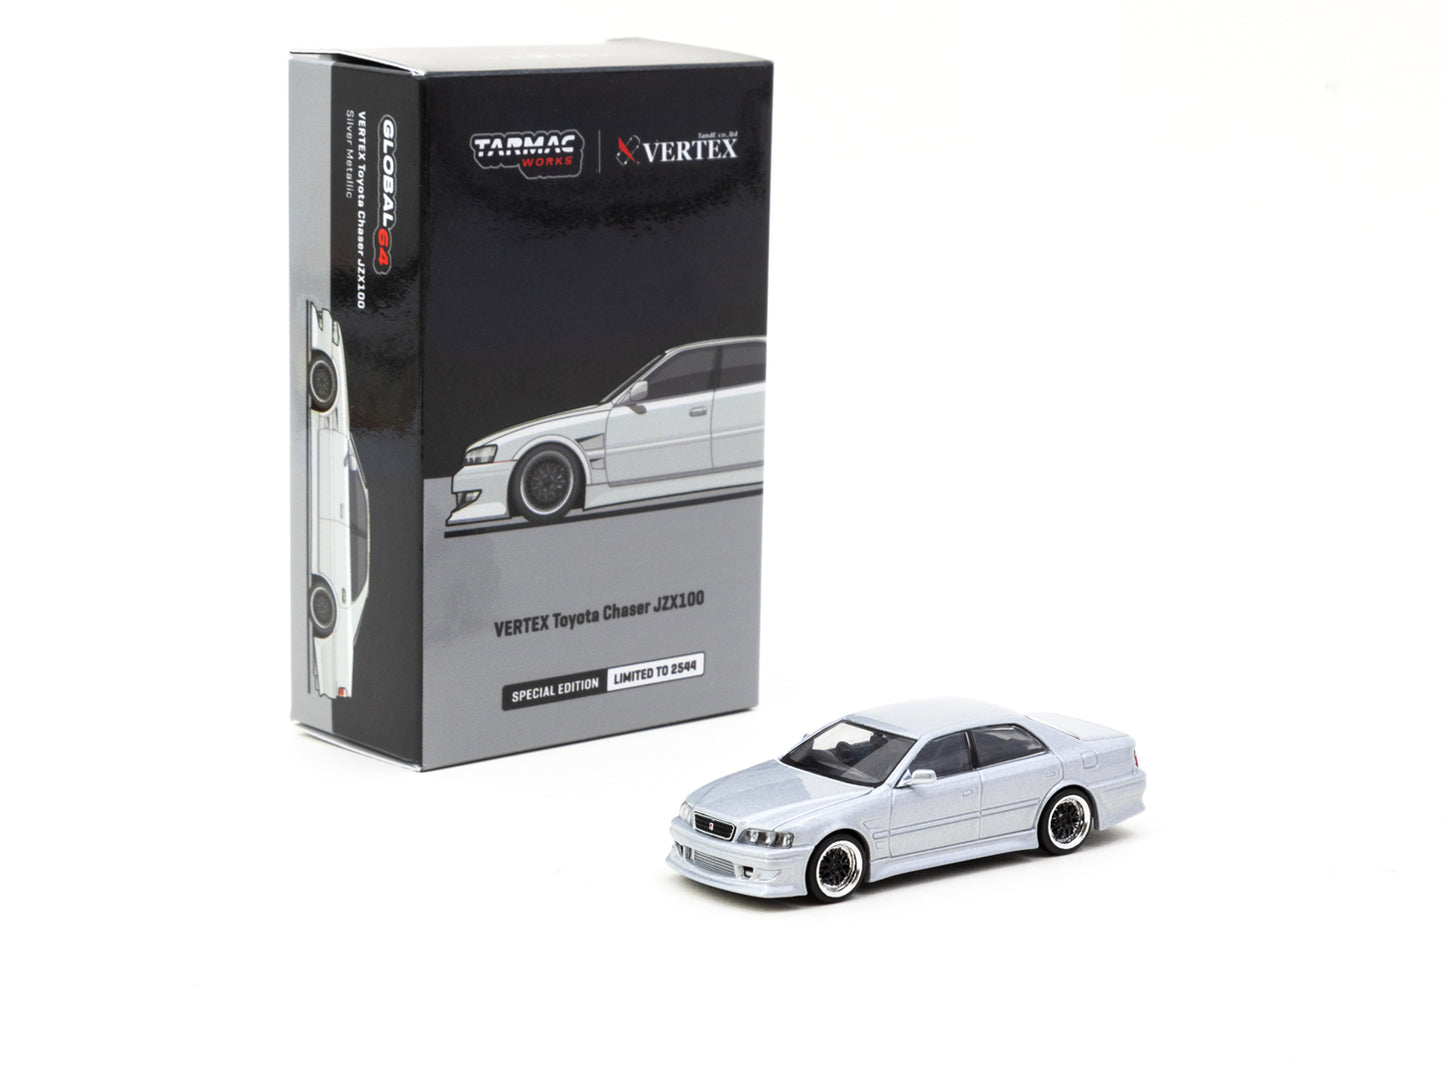 Tarmac Works VERTEX Toyota Chaser JZX100 Silver Metallic, Special Edition